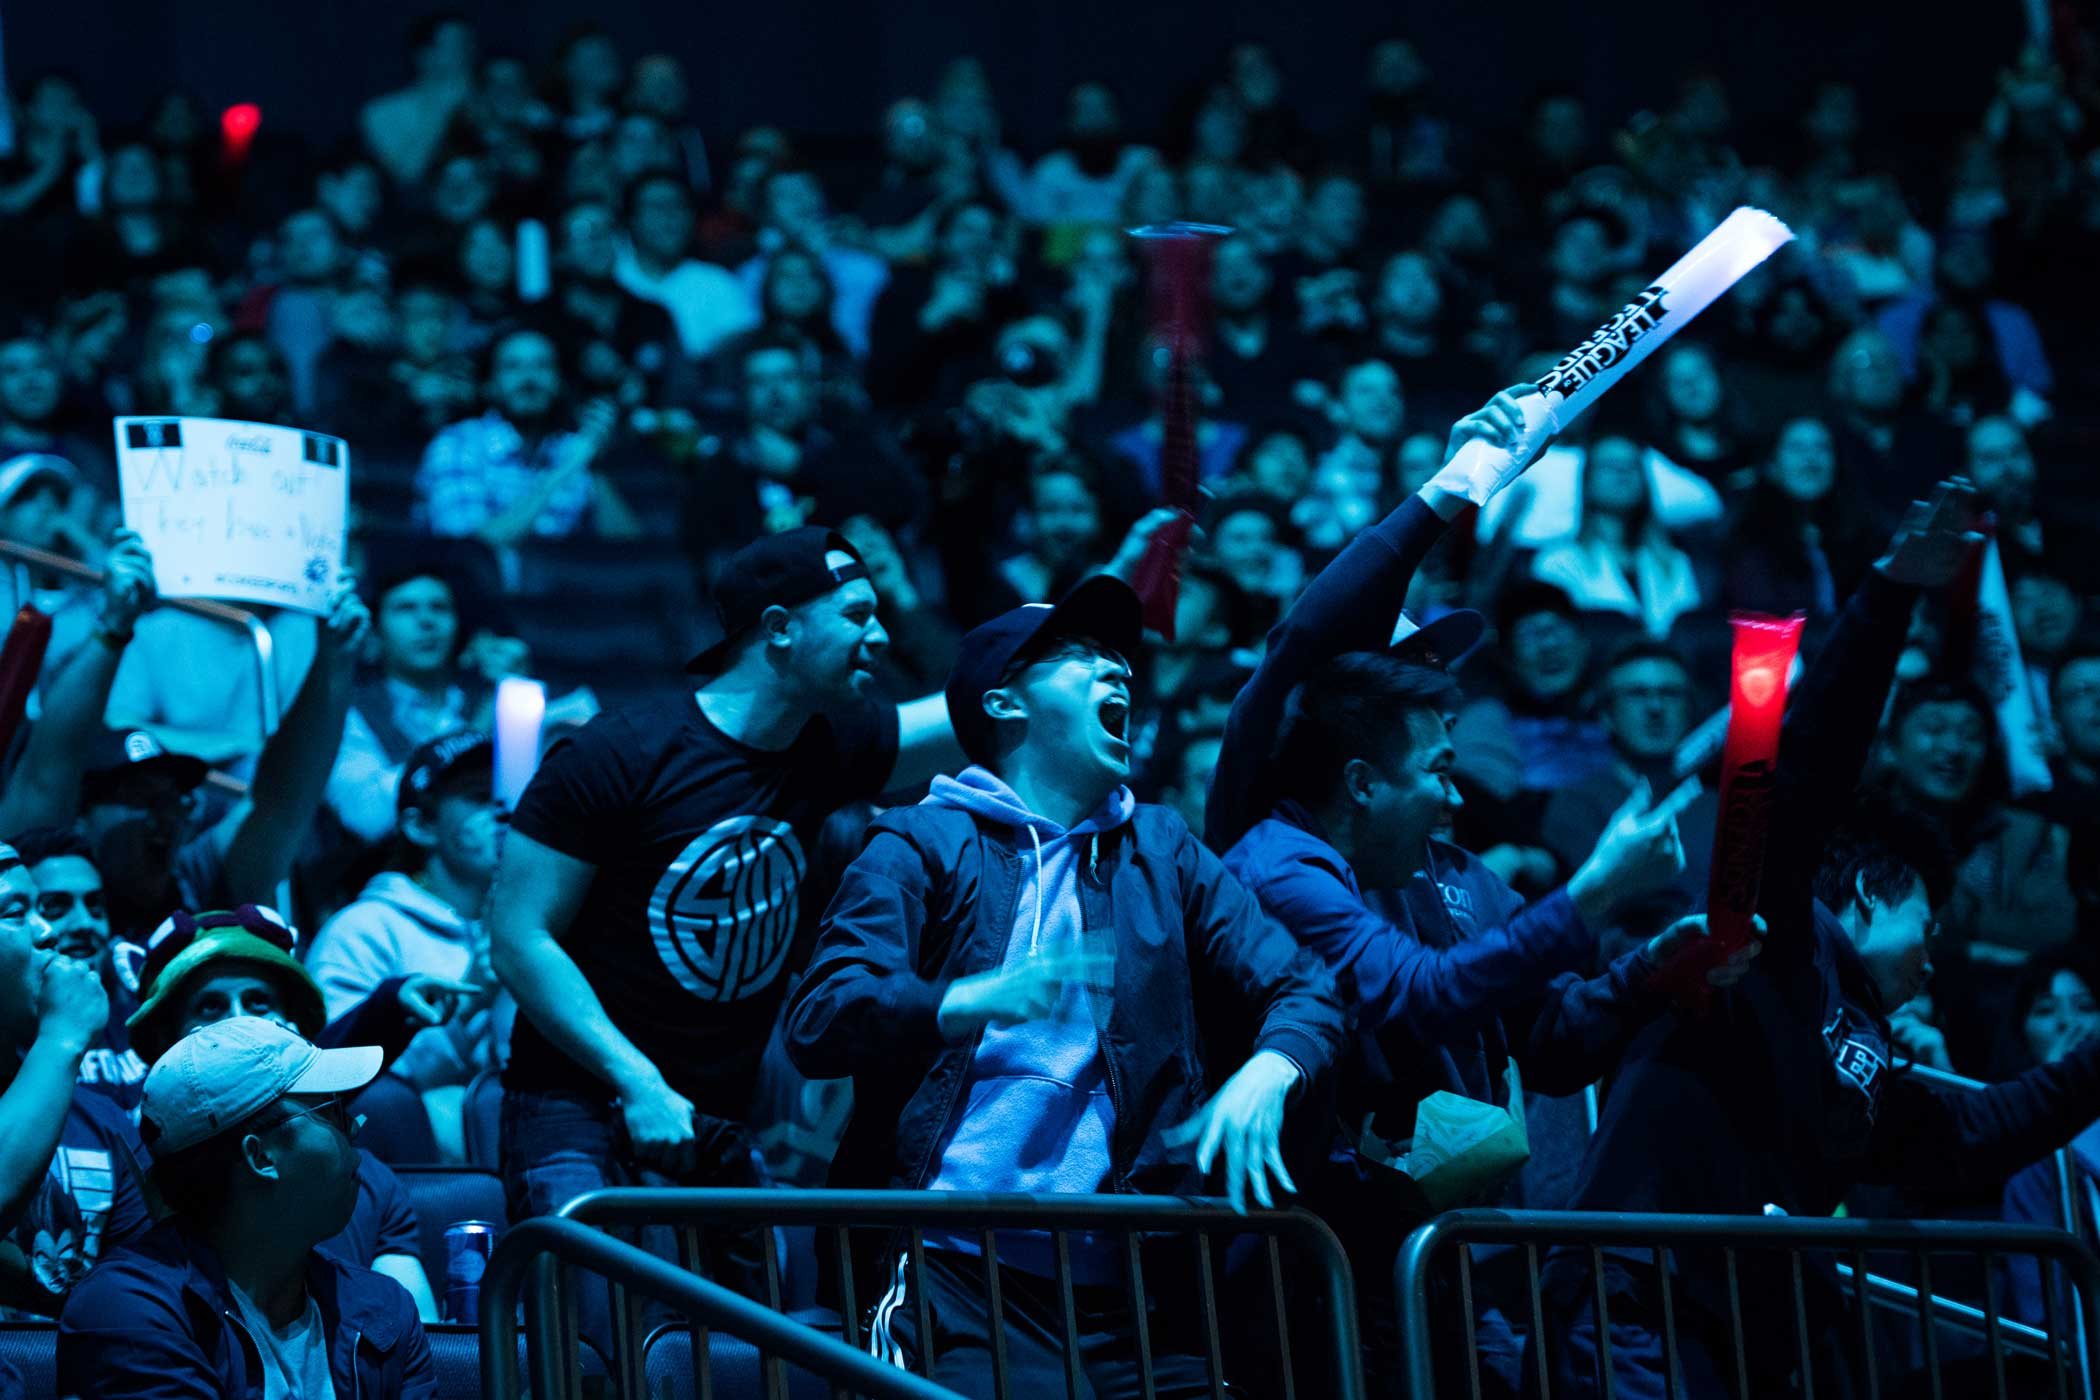 Fans of H2k-Gaming cheer for the team after they take a surprise first kill off of their opponents Samsung Galaxy in the first game of their best of five match at Madison Square Garden in New York, NY on Saturday. Mark Kauzlarich for TIME